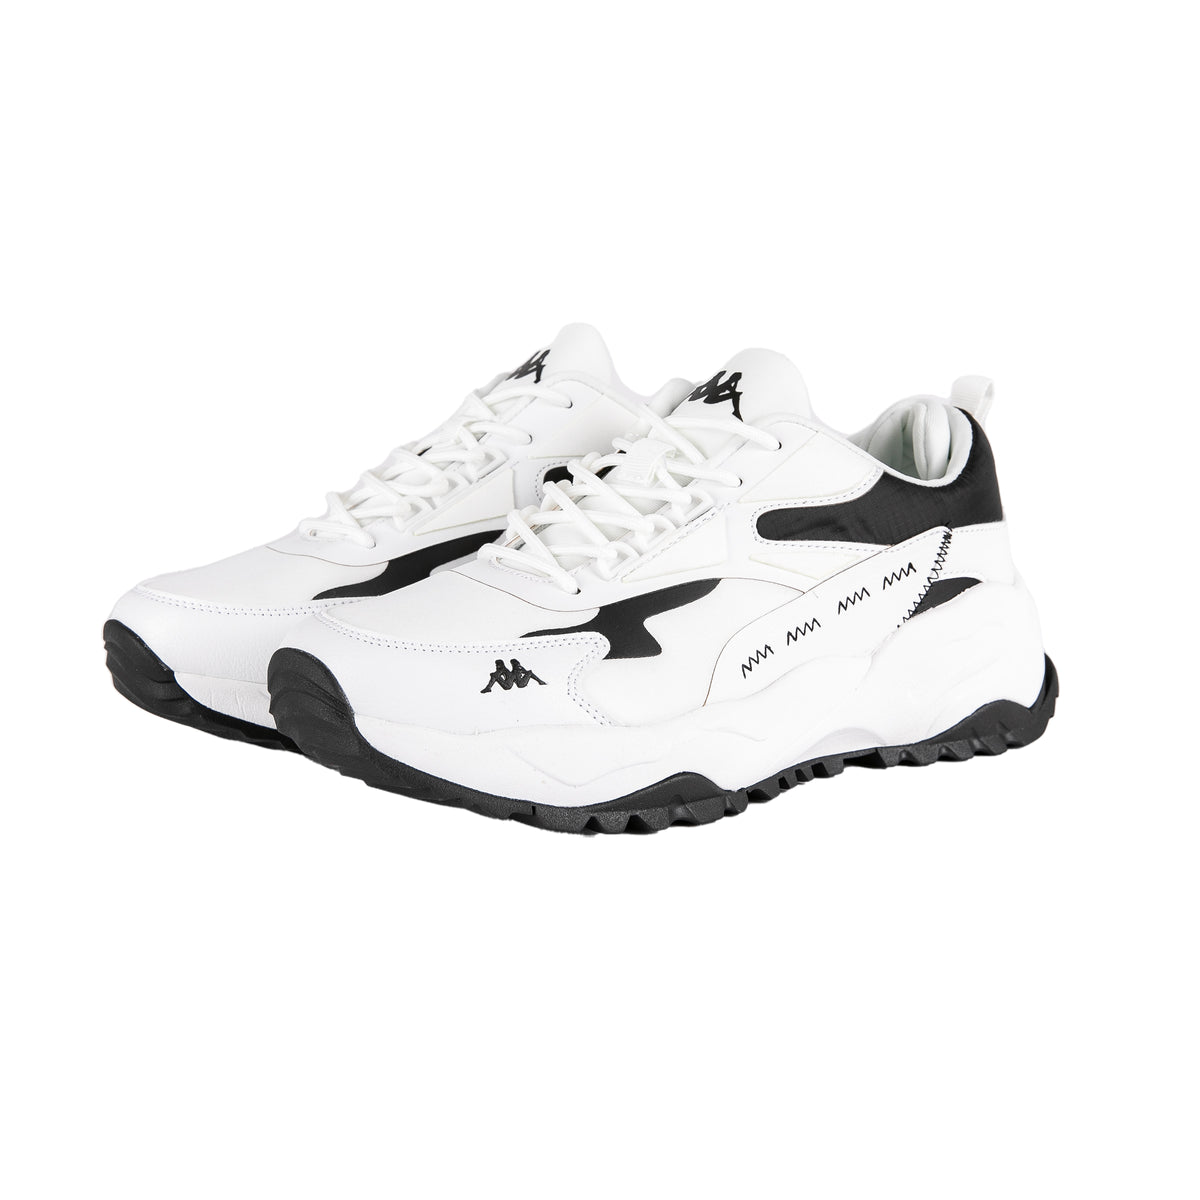 3 Sneakers White Authentic Shop Altin for - online Black US Kappa